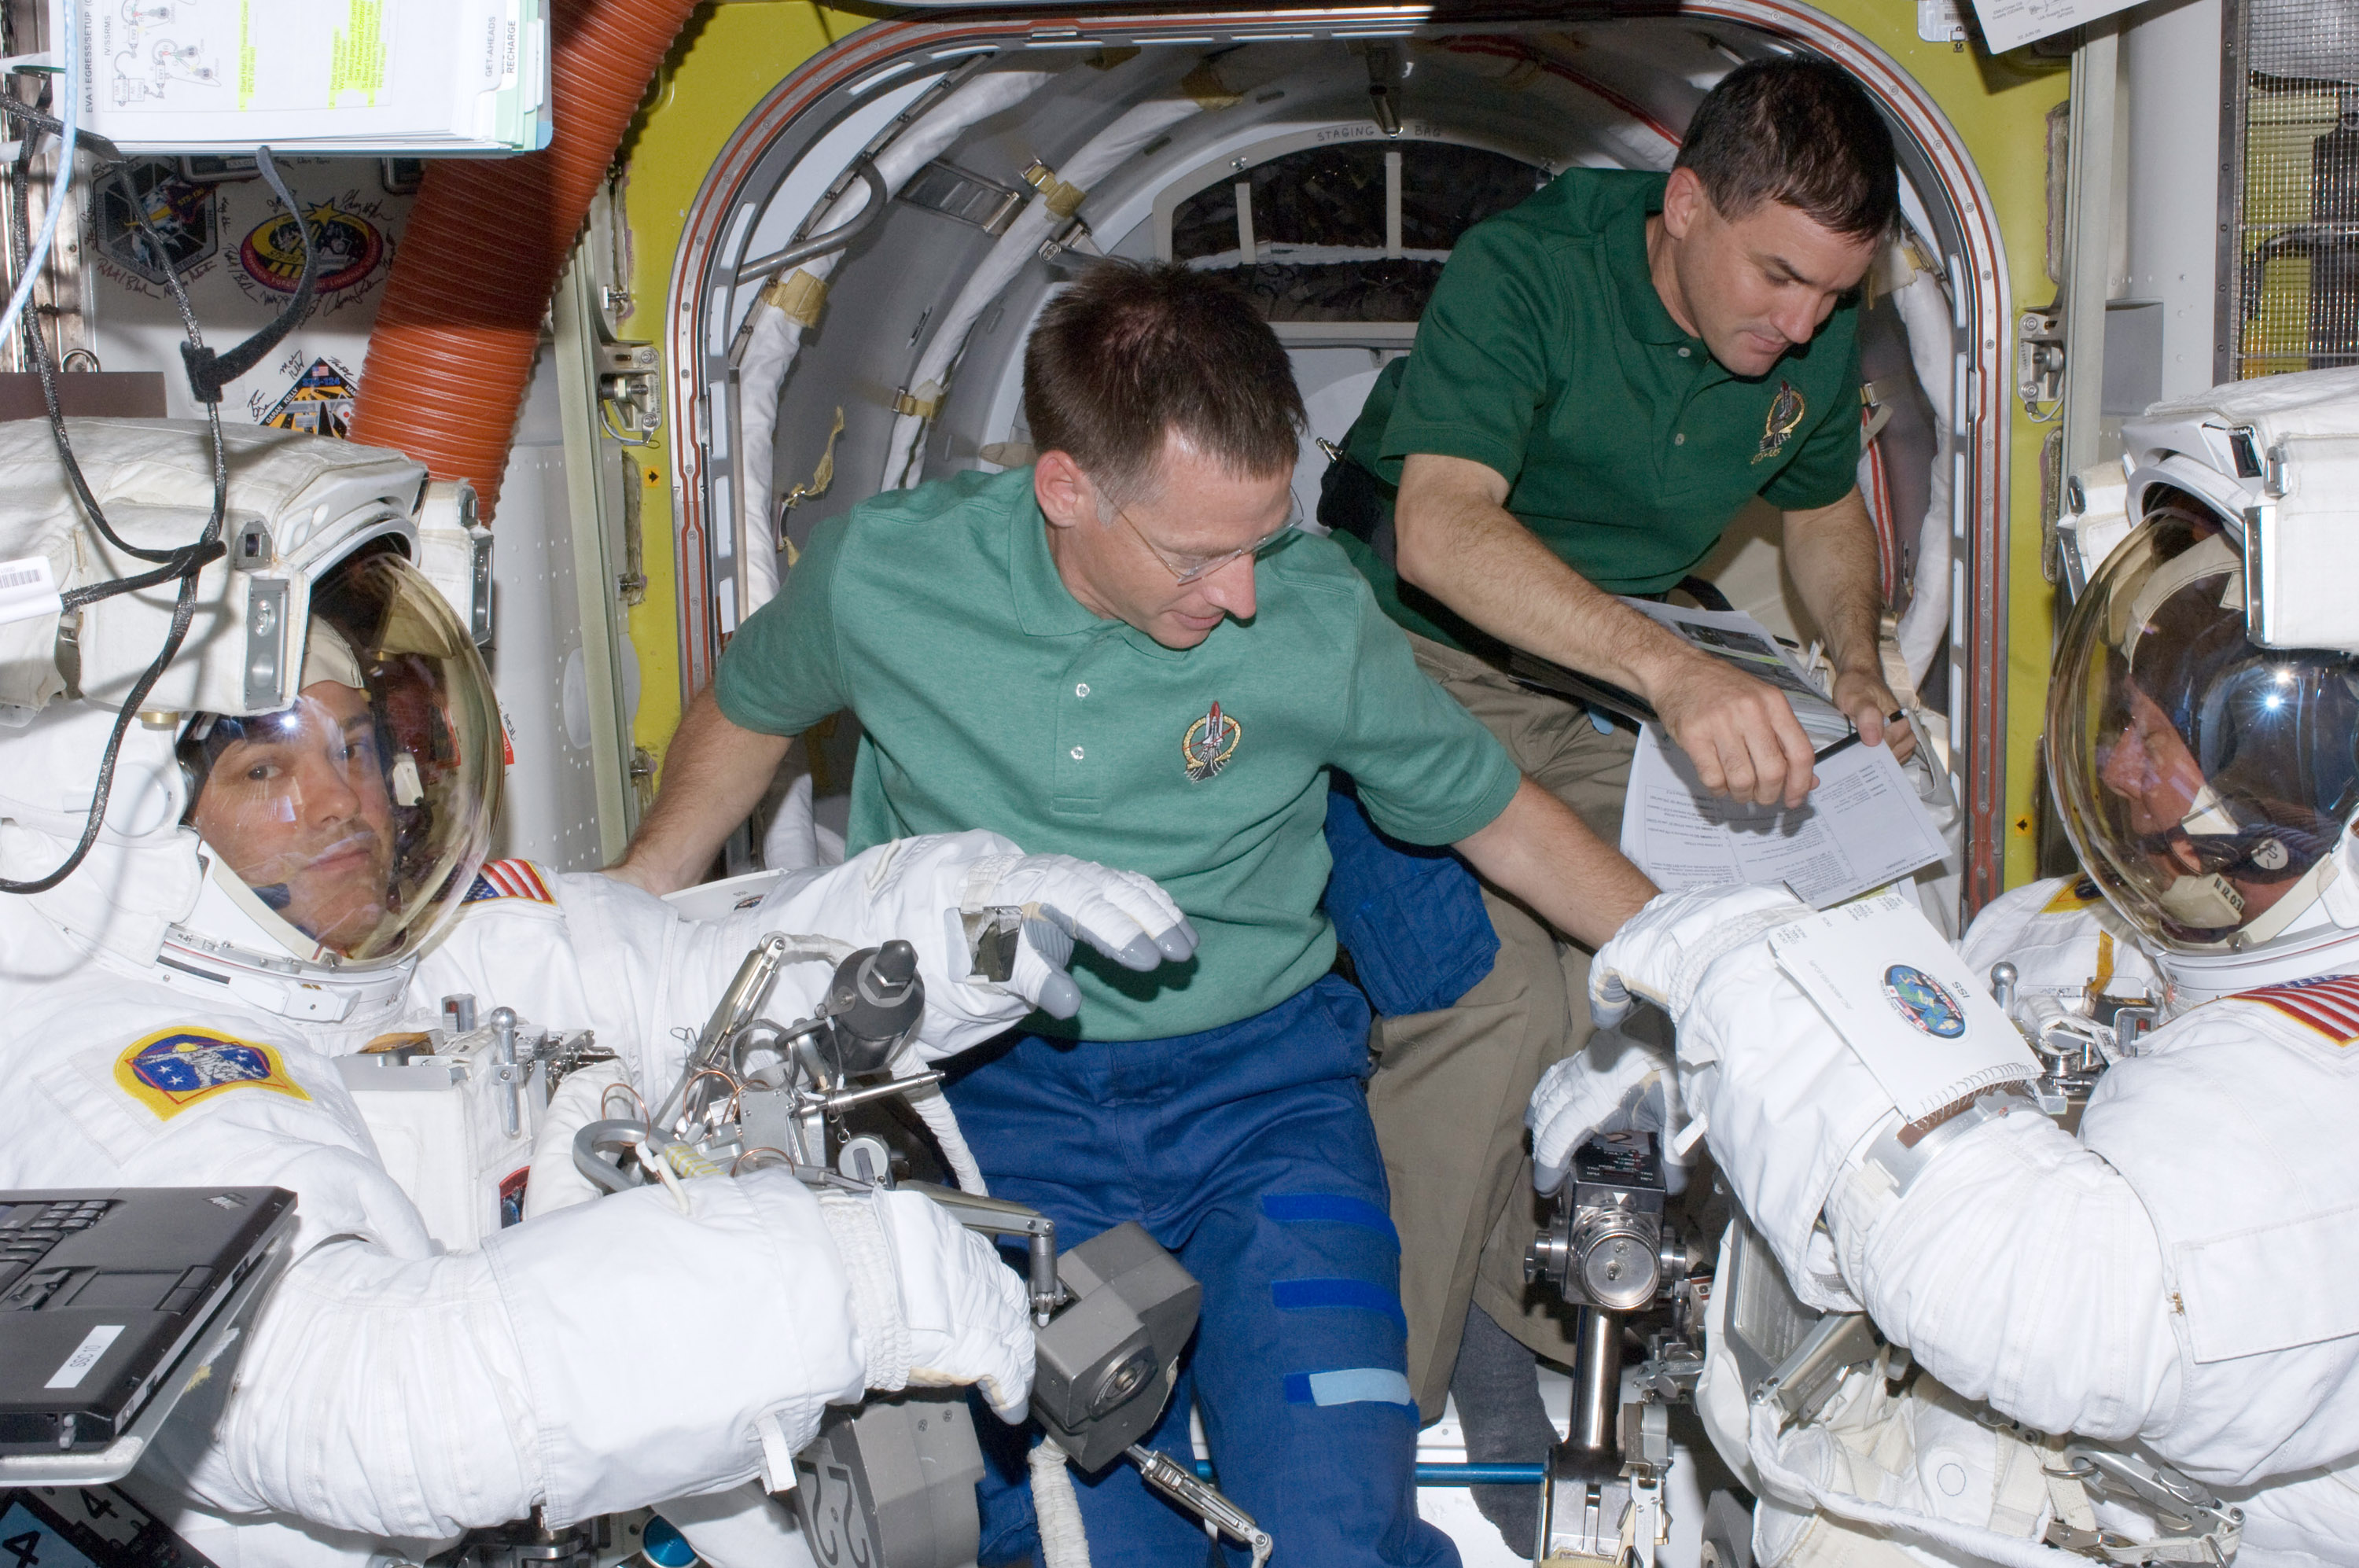 IN SPACE - JULY 12: In this handout image provided by the National Aeronautics and Space Administration (NASA), Wearing extravehicular mobility unit space suits, NASA astronauts Mike Fossum (right), and Ron Garan, both Expedition 28 flight engineers, are assisted by NASA astronauts Chris Ferguson (foreground) and Rex Walheim in the International Space Station's Quest airlock prior to the July 12 spacewalk during which Fossum and Garan egressed the orbiting complex to complete some needed chores July 12, 2011 in space. (NASA via Getty Images)